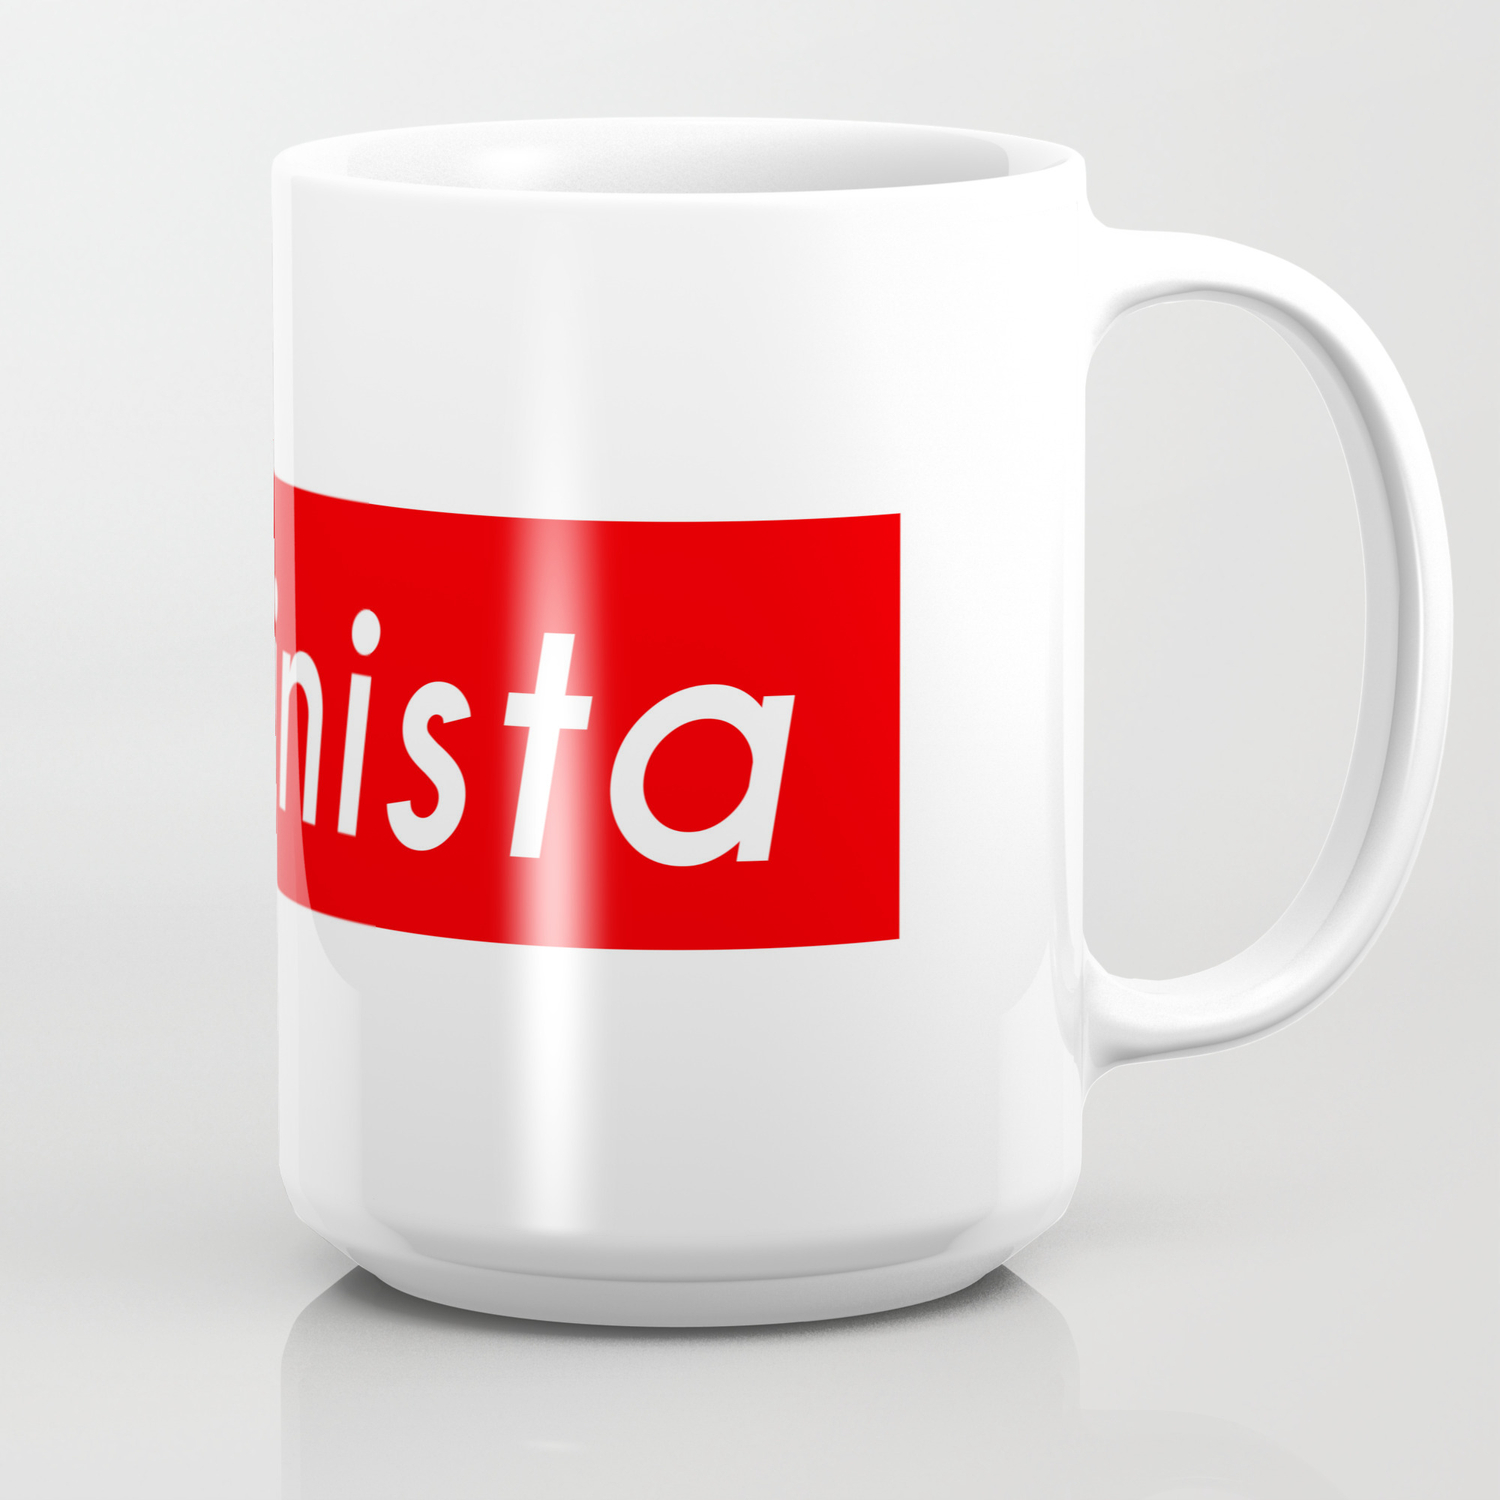 Feminista Feminist In Spanish Coffee Mug By Designite Society6,How To Make Pina Coladas With Alcohol